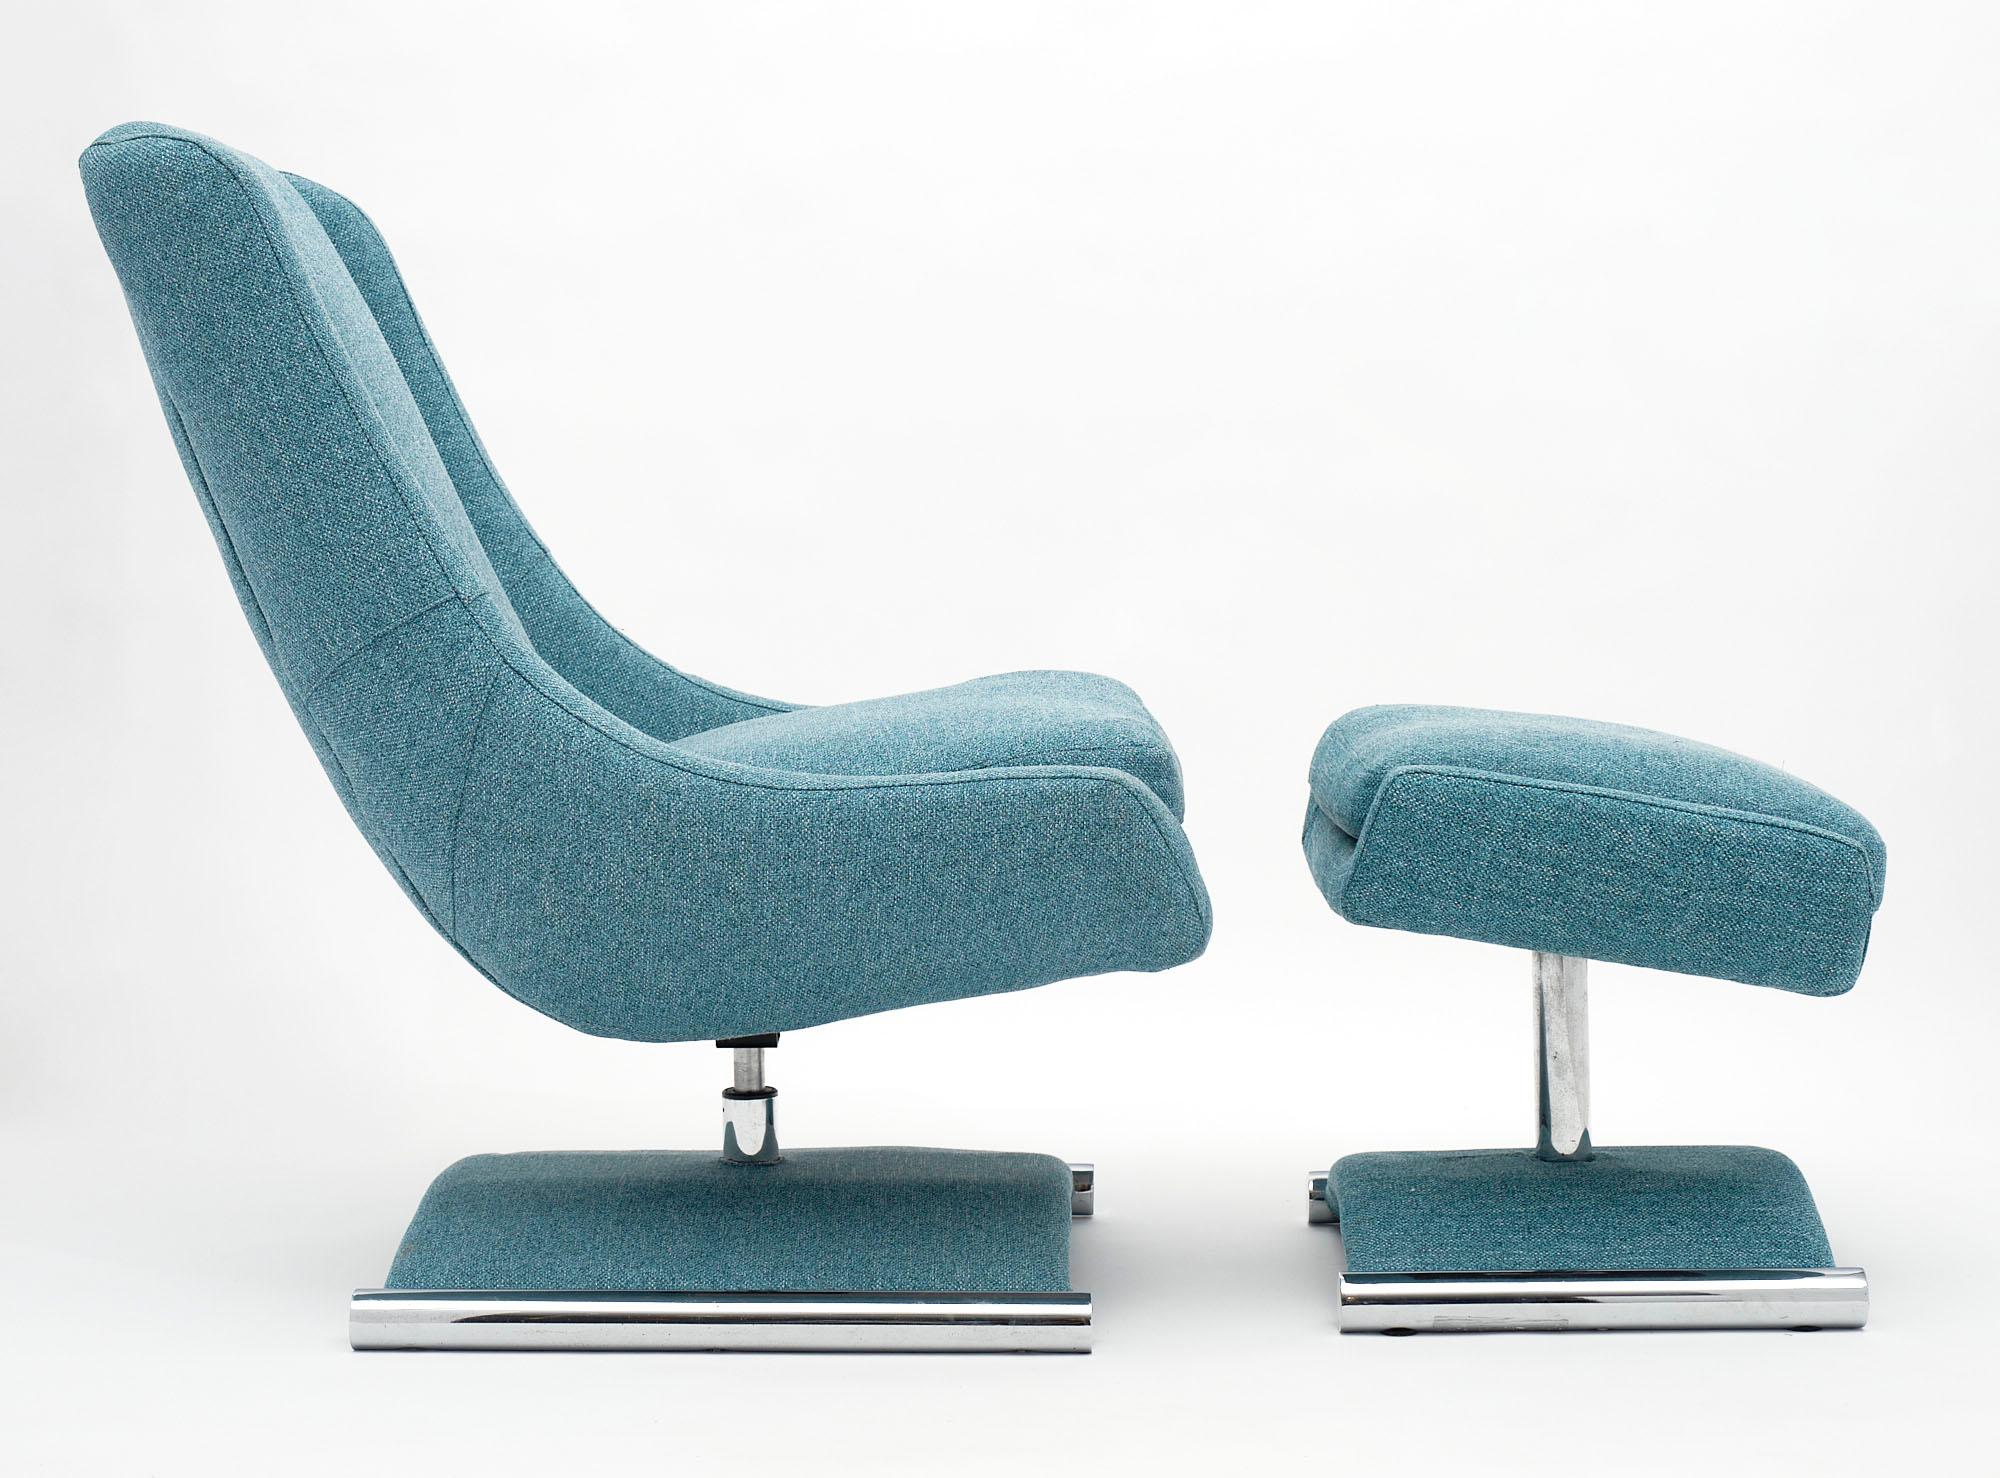 Armchair and ottoman from the Italian modernist period. The intact chrome base on the armchair swivels. This pair has been newly upholstered in a turquoise chenille blend. The measurements listed are for the armchair, the measurements for the